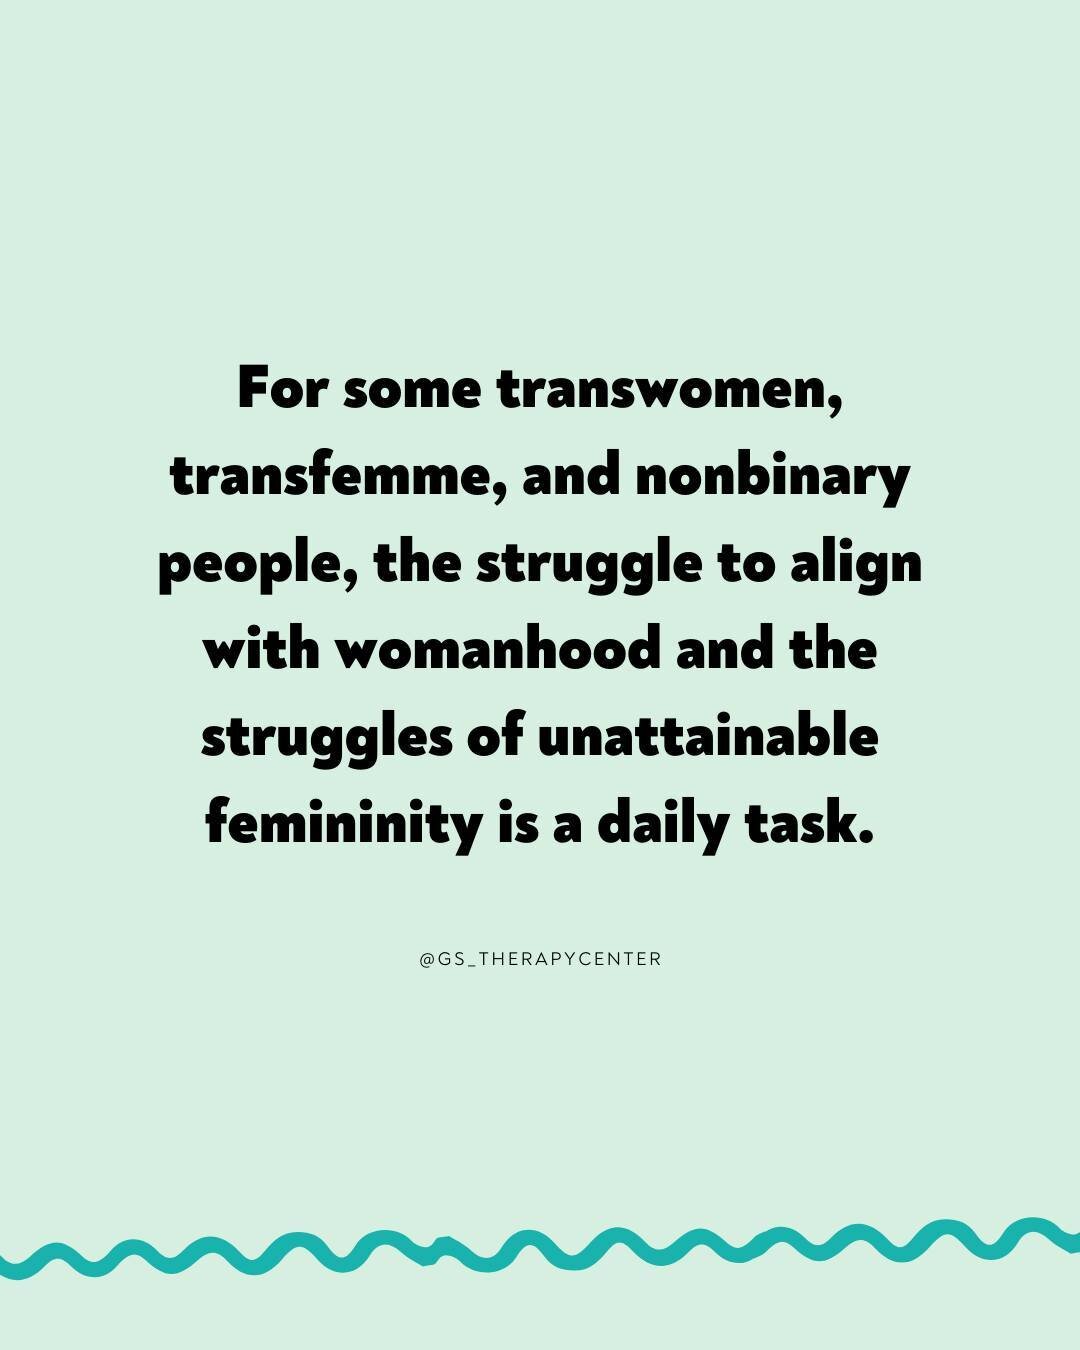 For trans and nonbinary people, this feeling of failing at being a woman can be demoralizing despite where you are on the gender spectrum. The language of &ldquo;failed woman&rdquo; itself is harsh and can leave one with a sense of finality. Yet, dec